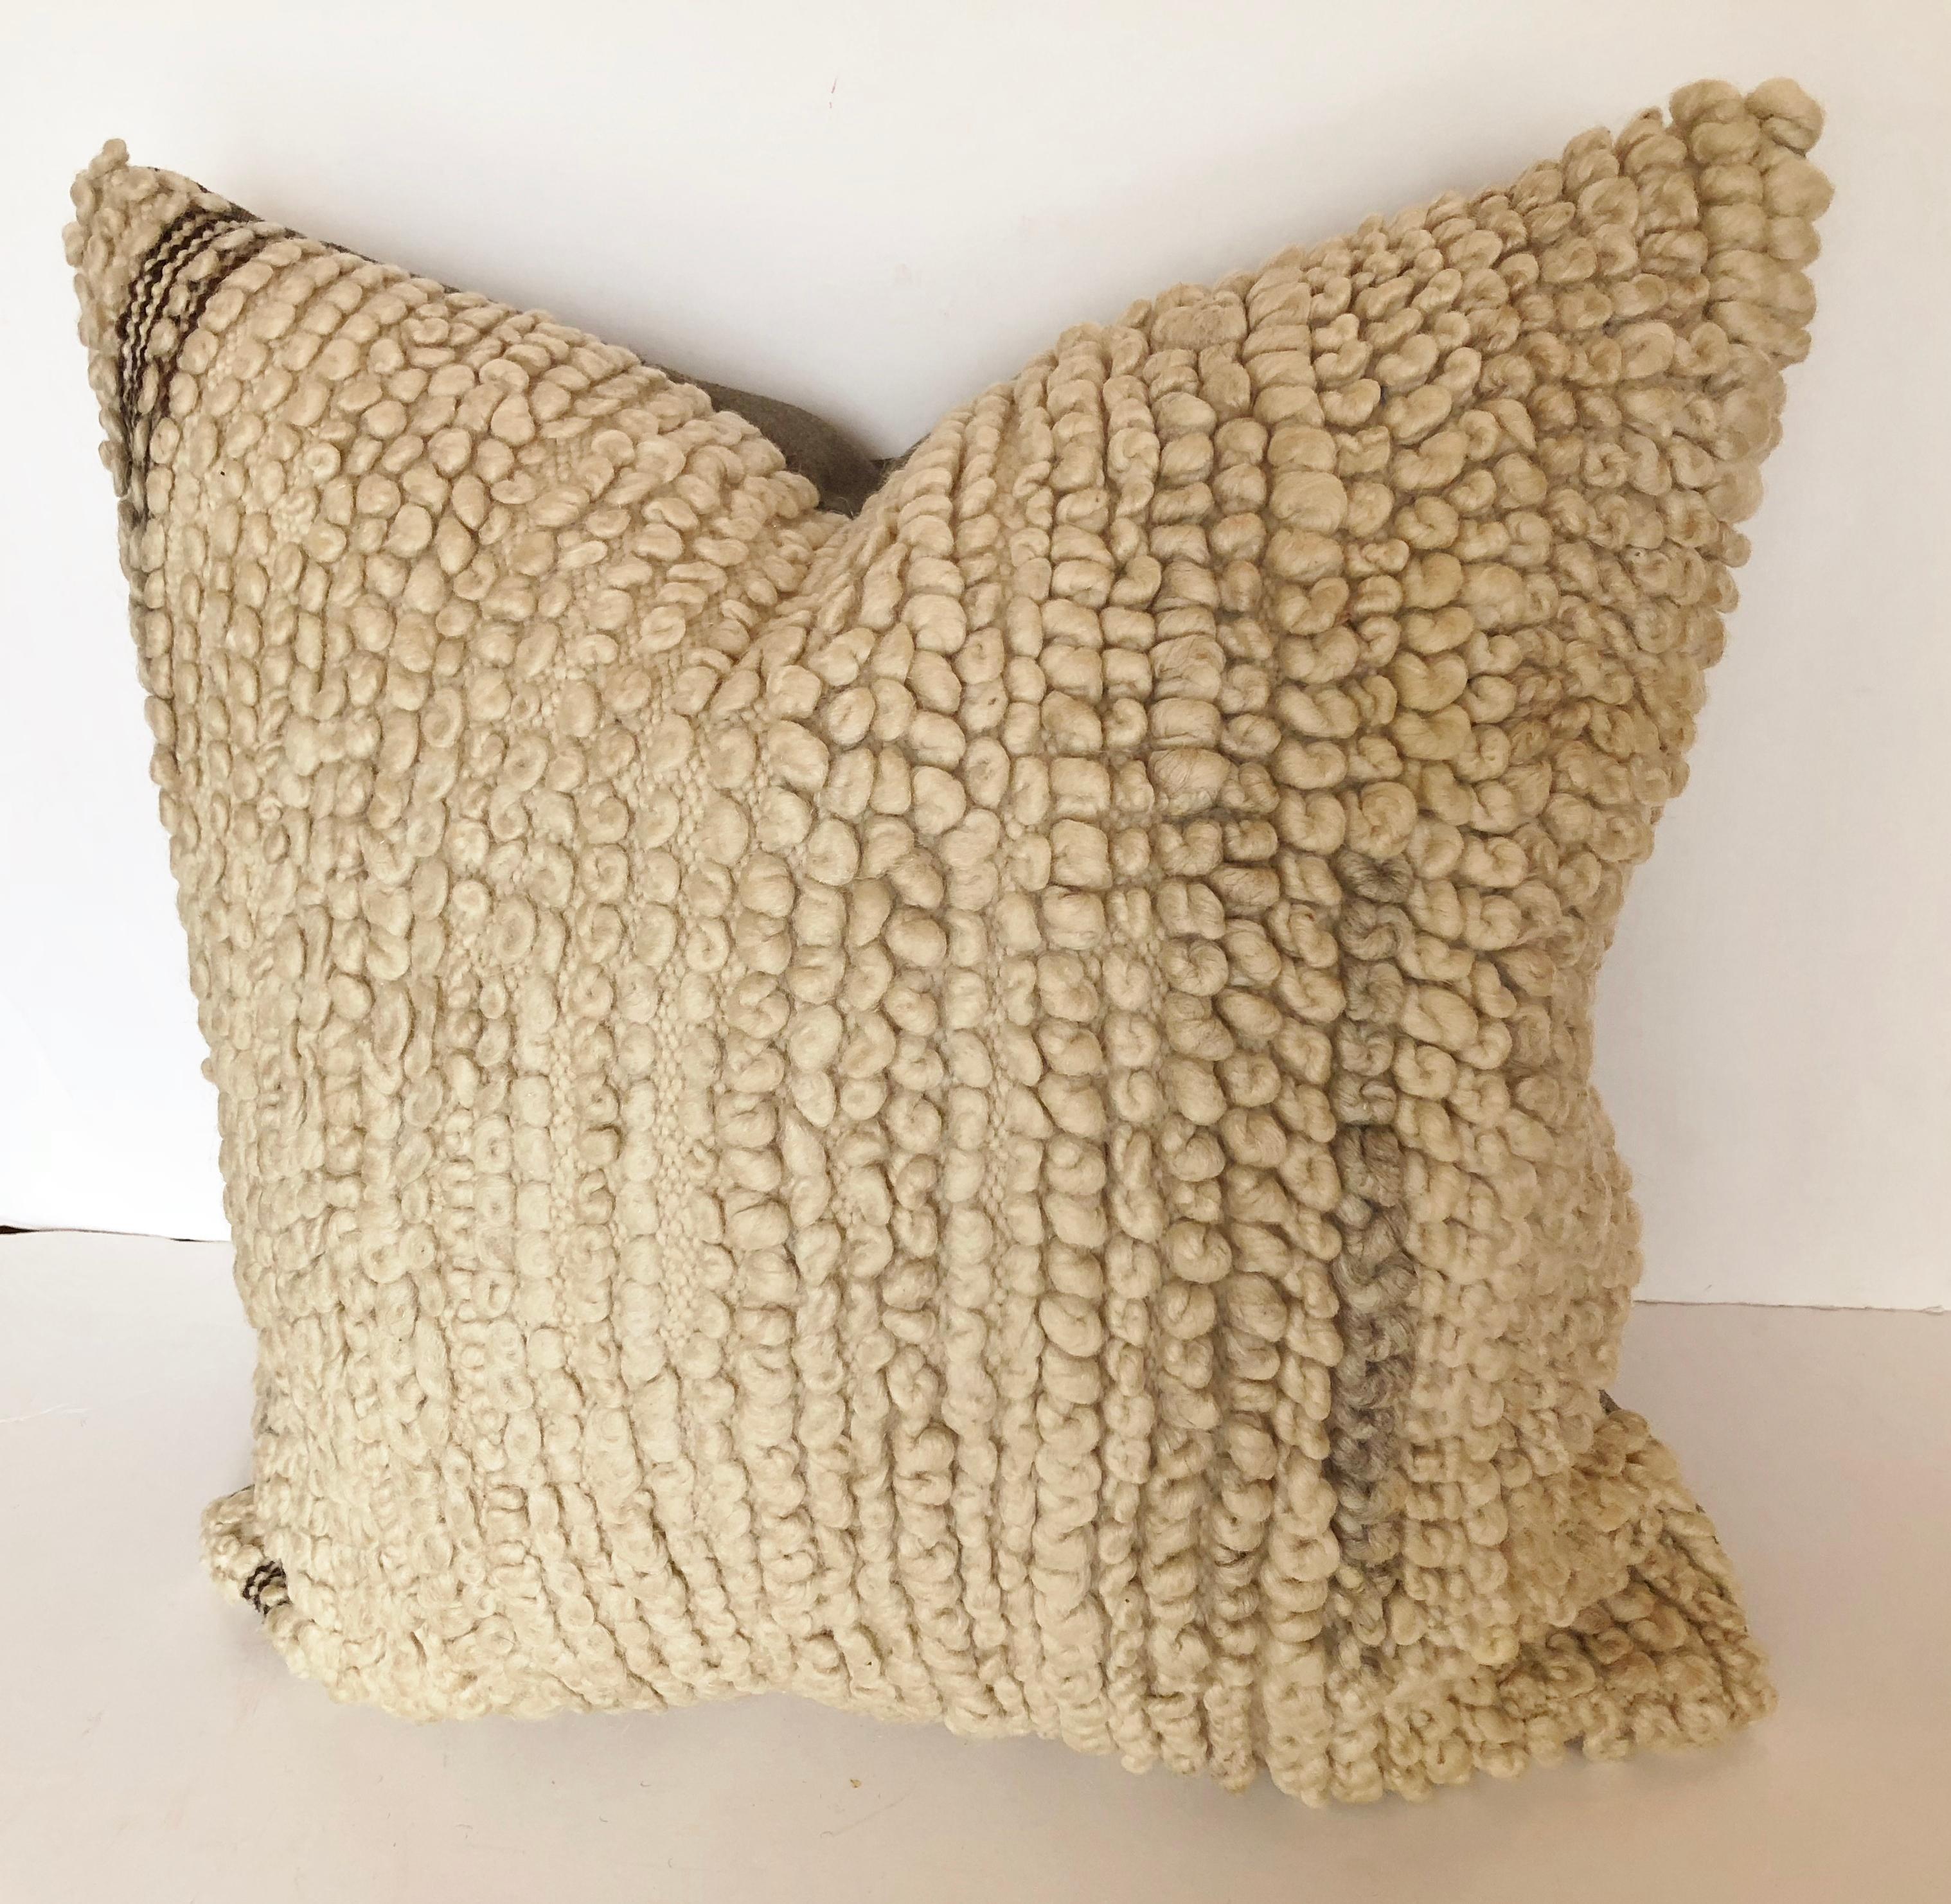 Custom pillow cut from a vintage handwoven wool Moroccan Beni Ouarain rug from the Atlas Mountains. Wool is soft and lustrous with all natural color. Pillow is backed in a wool blend, filled with an insert of 50/50 down and feathers and hand sewn